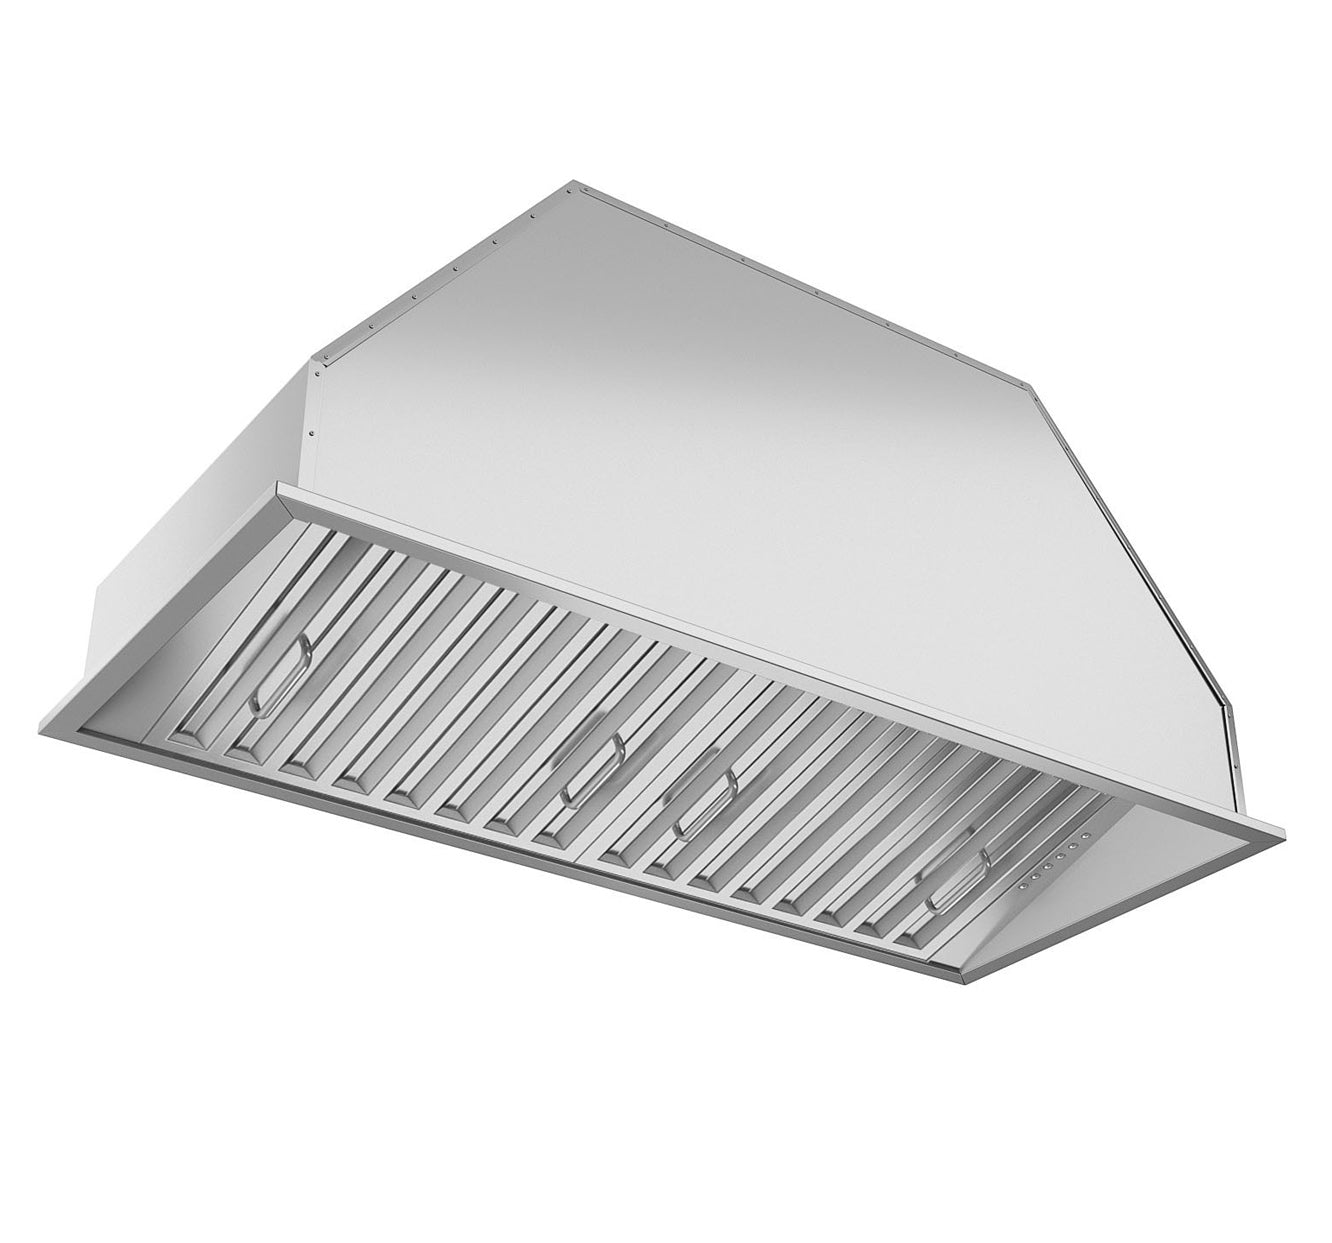 Ancona AN-1366 34 in. Pro Insert Range Hood with LED lights